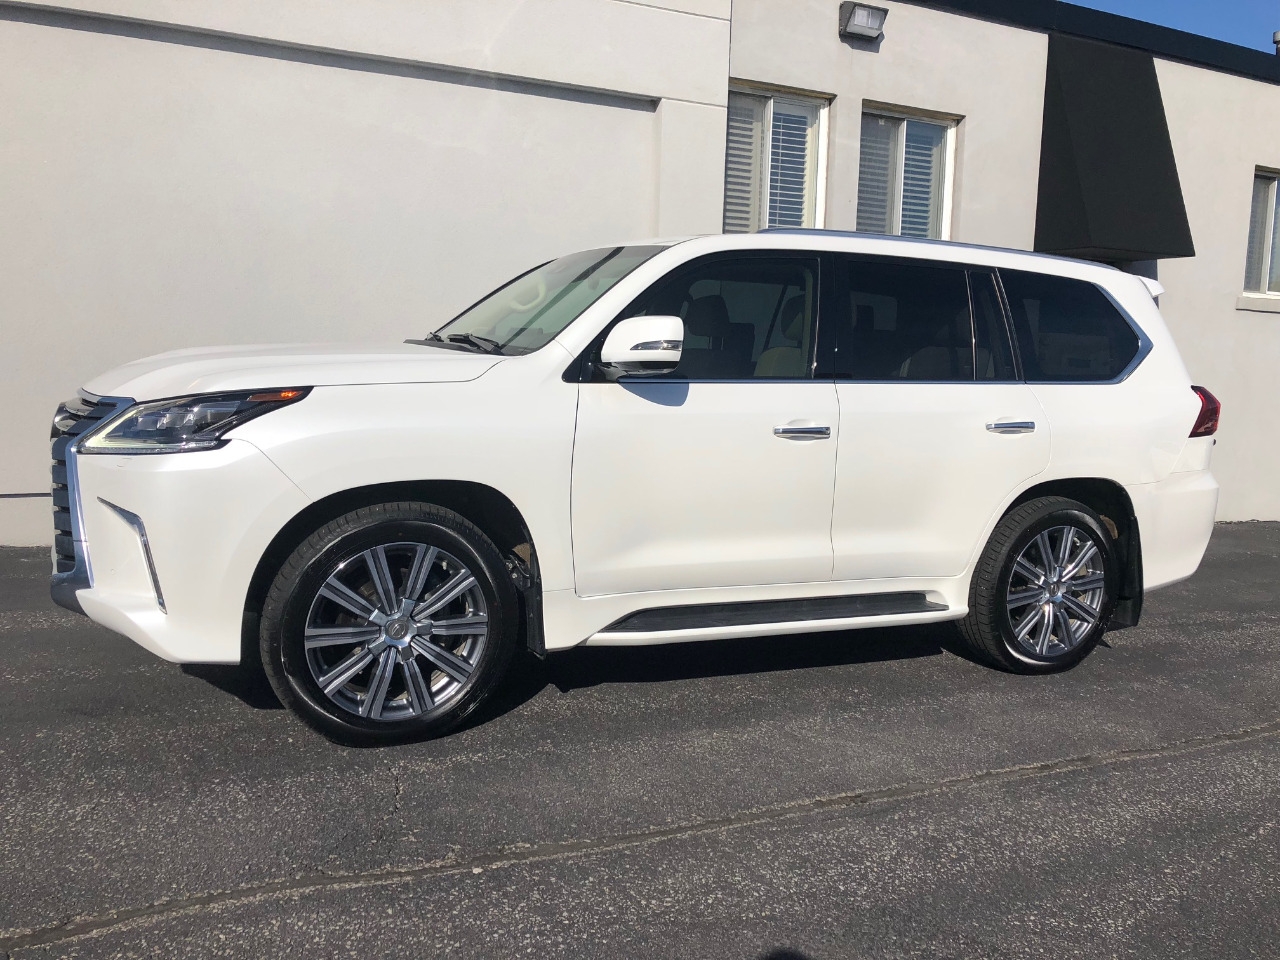 Used Lexus Lx570 Available For Sale